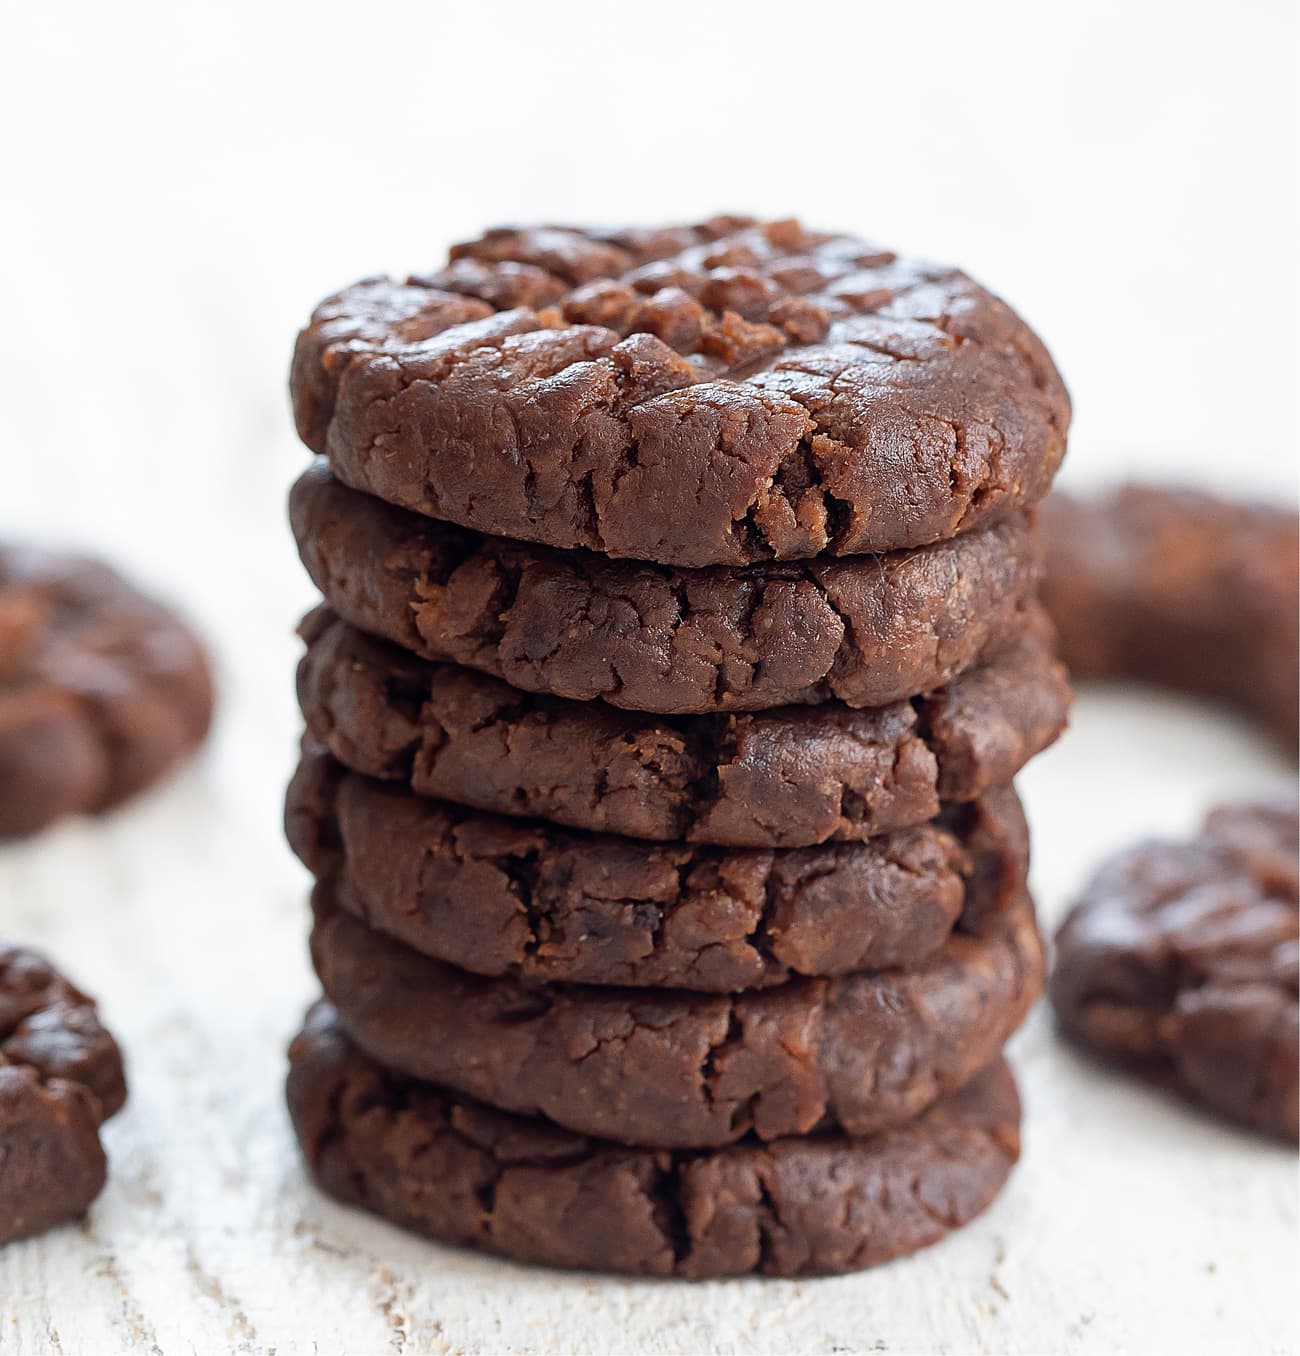 3 Ingredient No Bake Chocolate Peanut Butter Cookies No Flour Eggs Added Sugar Or Butter 5917